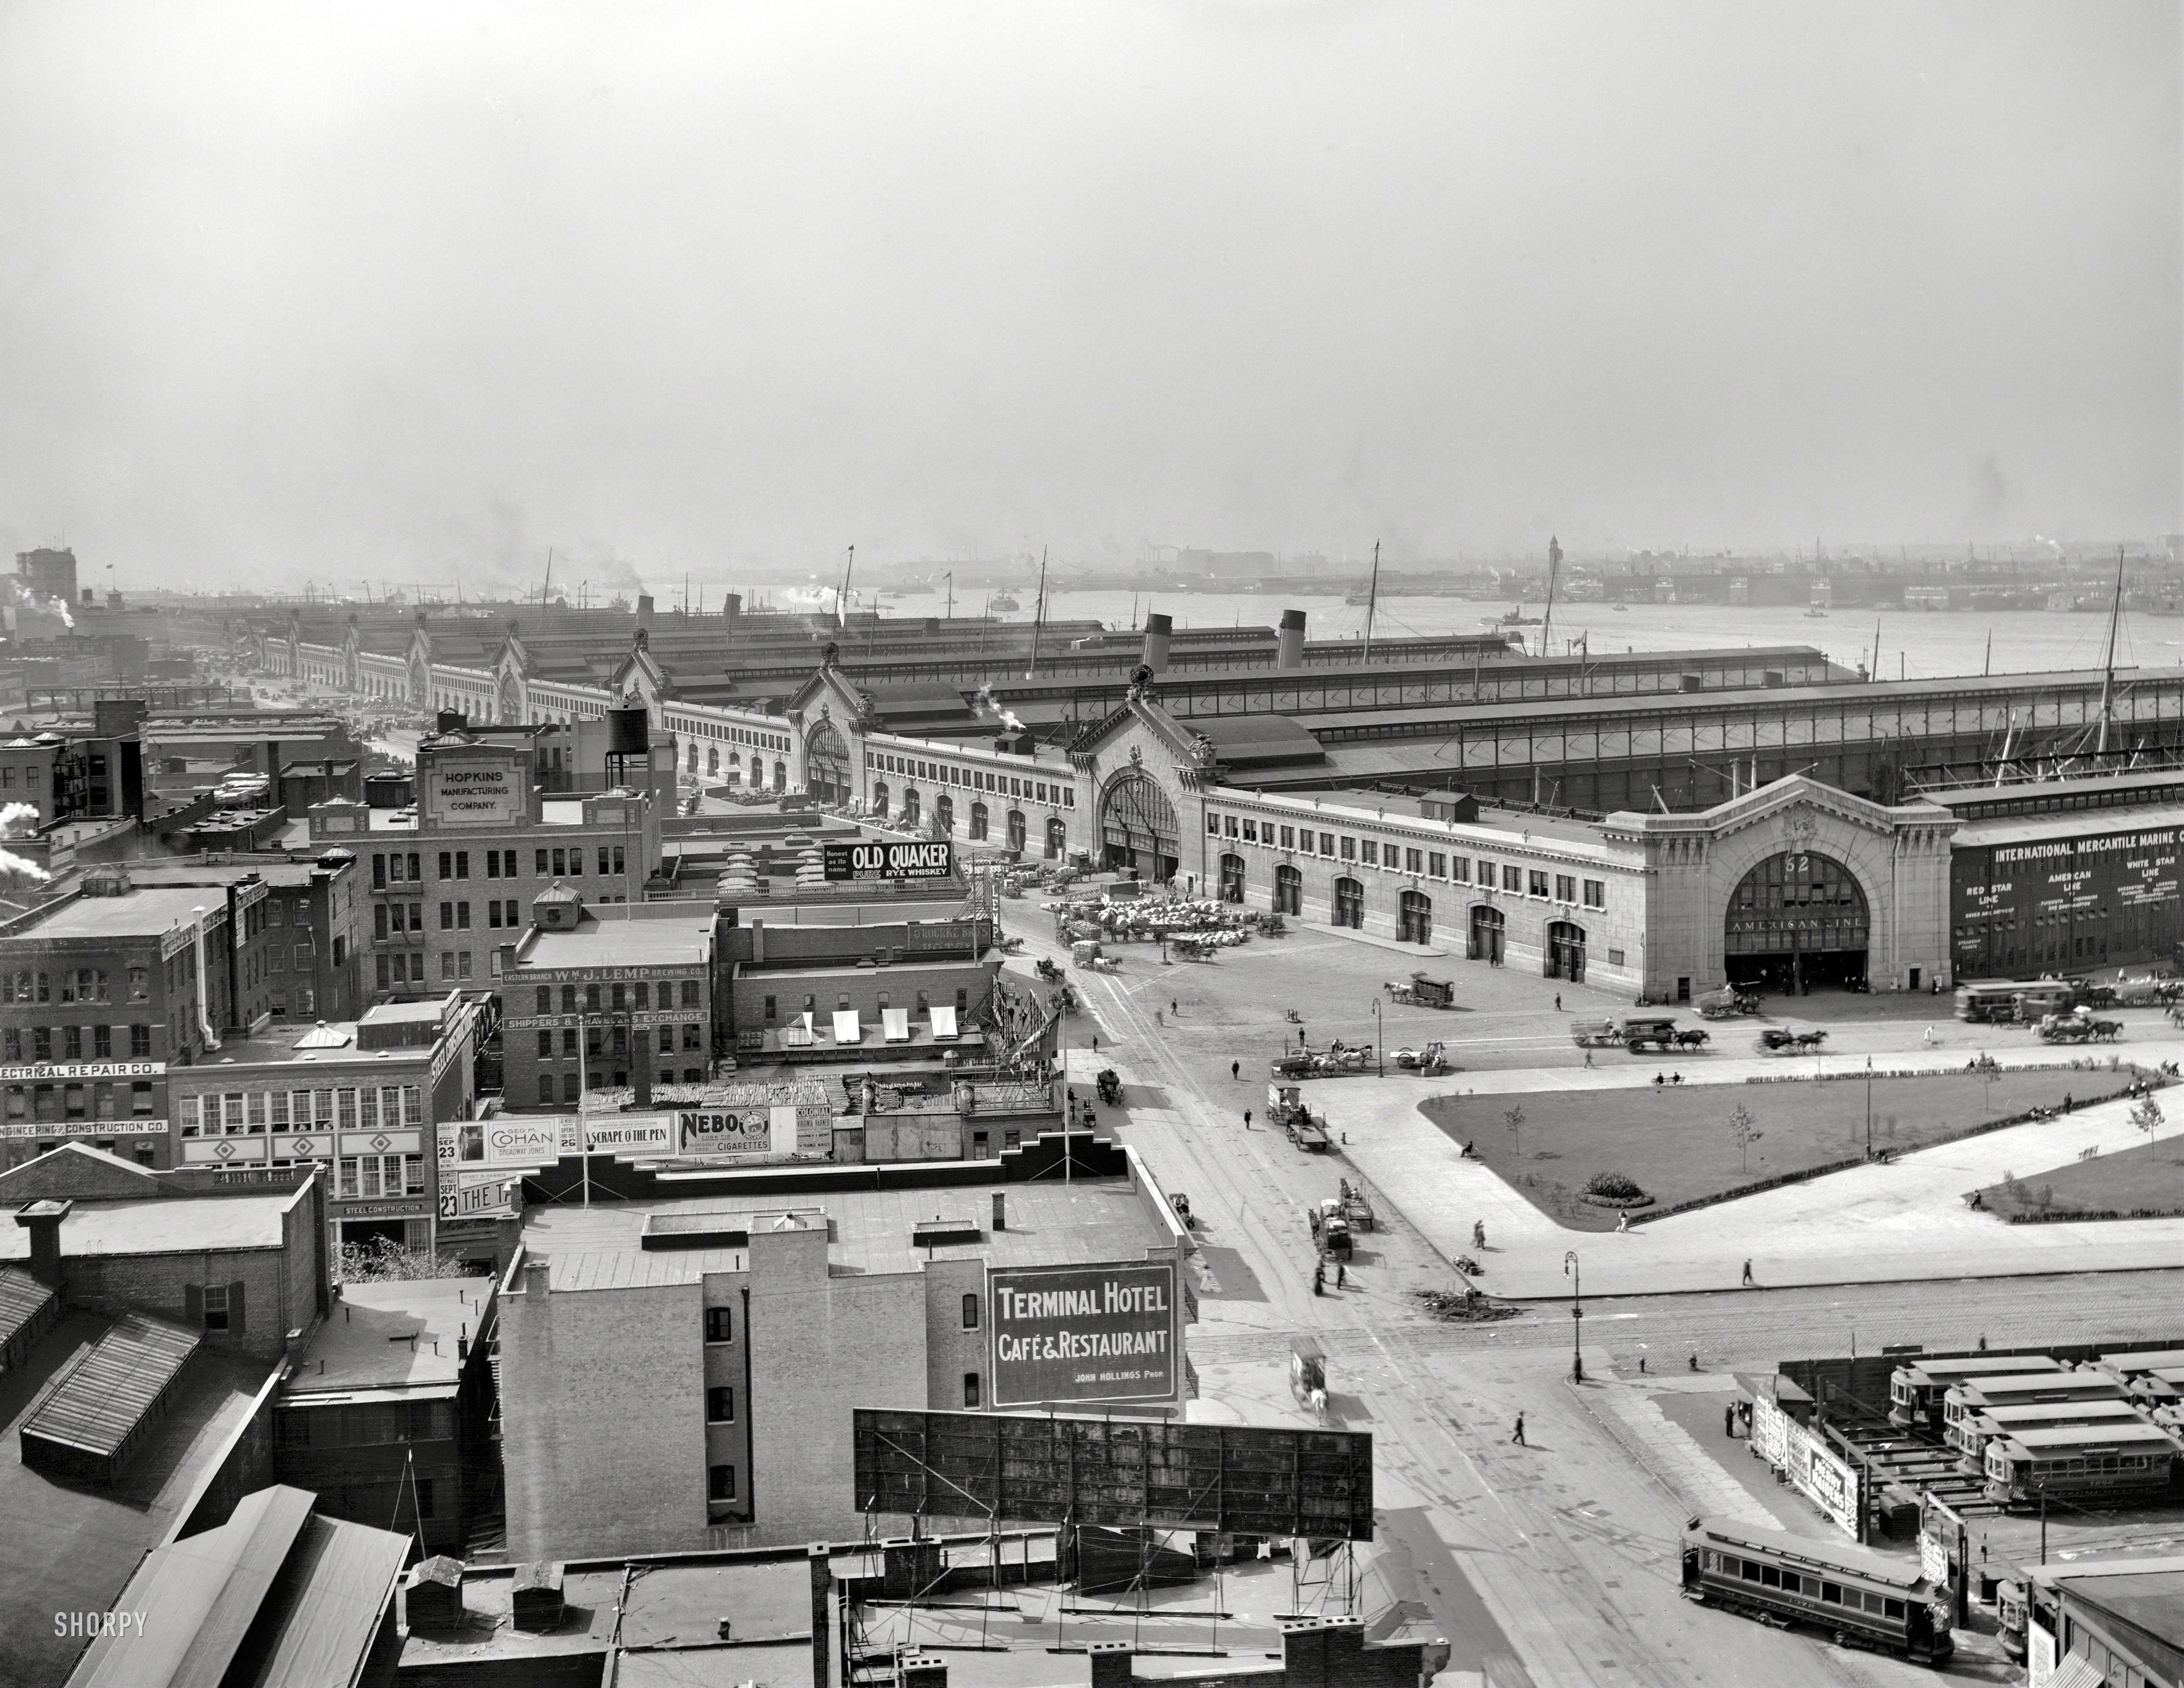 New York, 1912. "New Chelsea Piers on the Hudson." Feast your eyes on this veritable visual smorgasbord. 8x10 inch glass negative, Detroit Publishing Company. View full size.